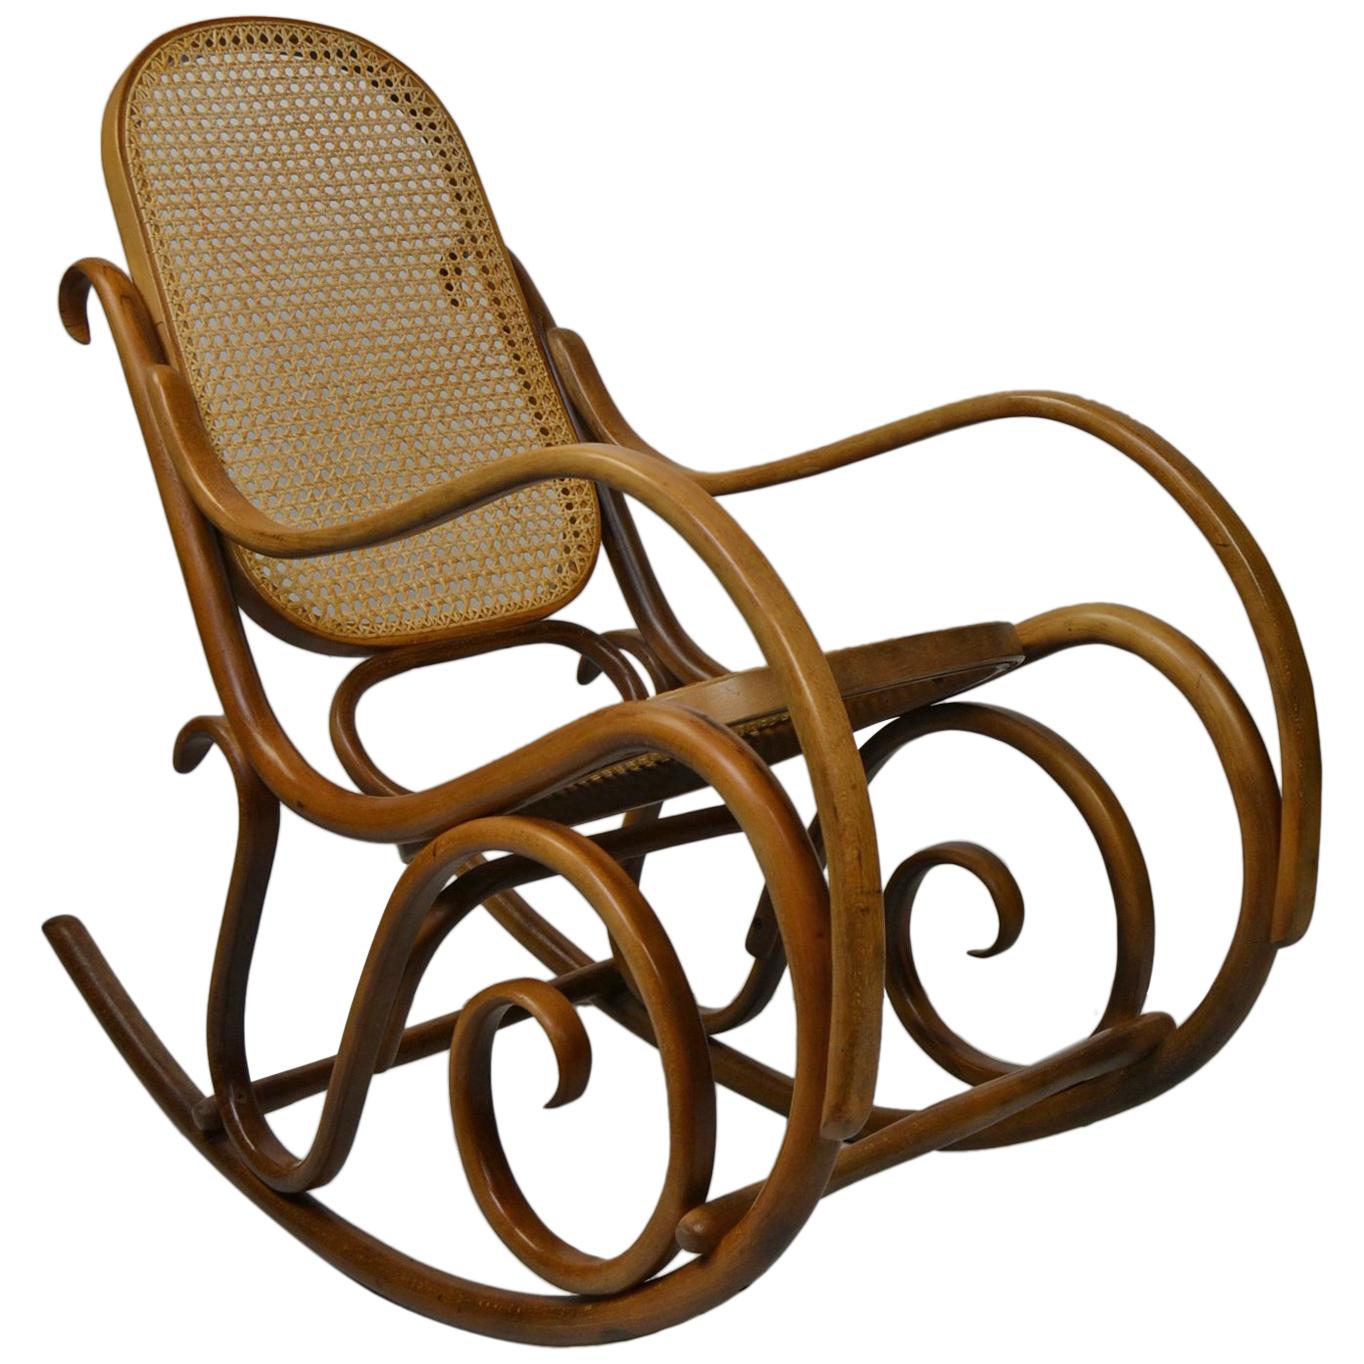 Bentwood and Cane Rocking Chair, Thonet Style